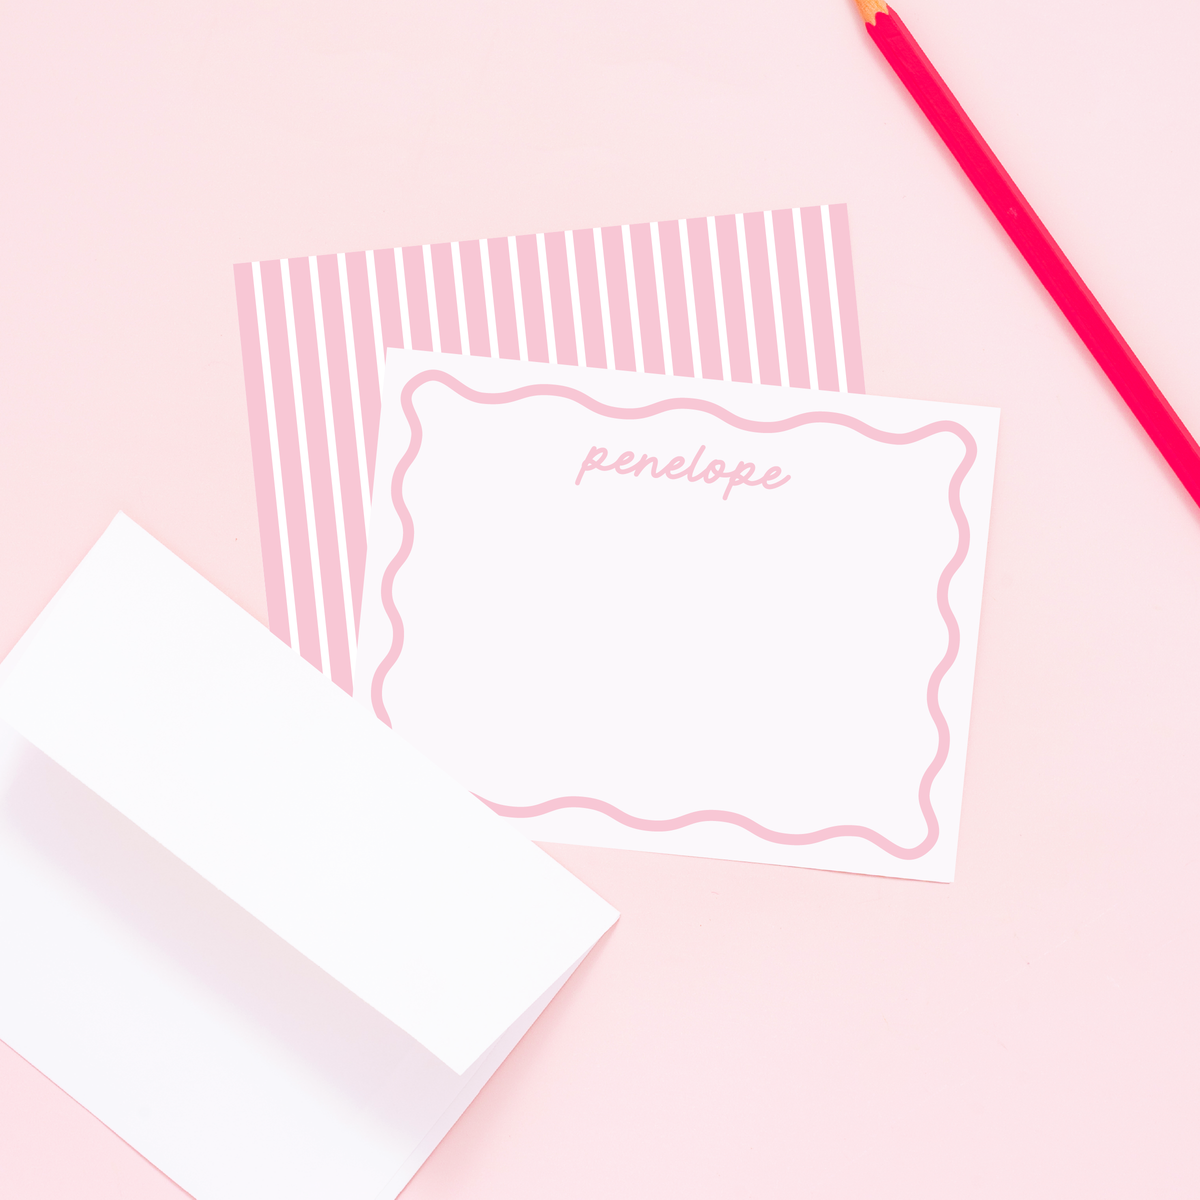 Oh Baby! Personalized Wavy Stationery